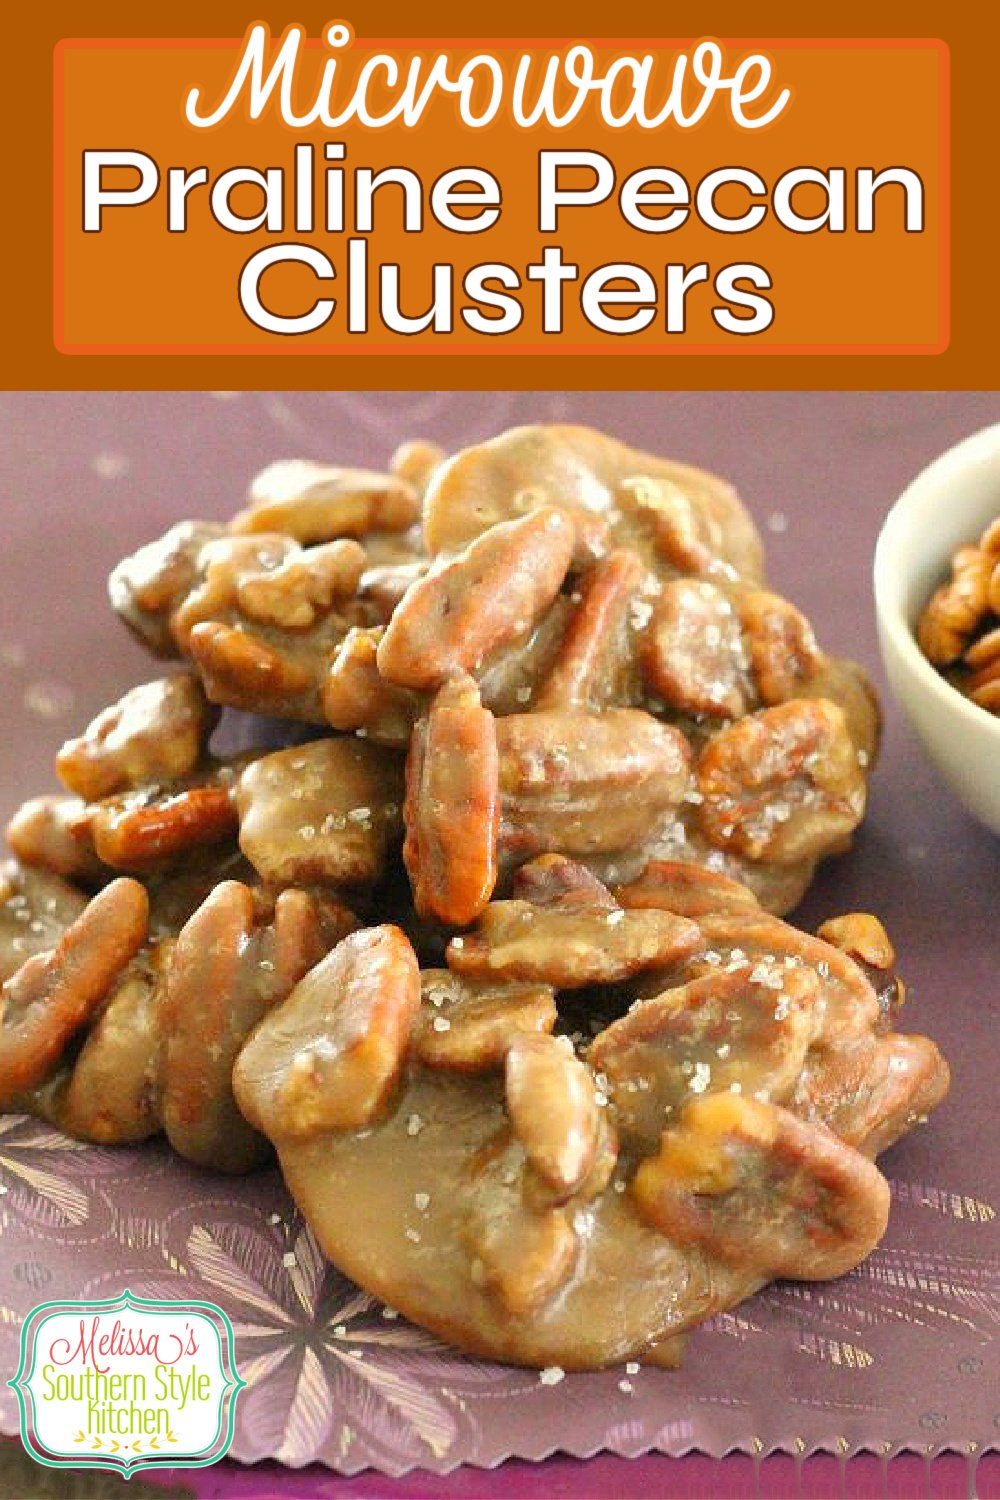 Make these scrumptious Sea Salted Praline Pecan Clusters in the microwave in no time flat #pralines #pralinepecans #pralinepecanclusters #candy #southernpralines #desserts #dessertfoodrecipes #southernfood #southernrecipes #holidayrecipes #easter #christmas #melissassouthernstylekitchen